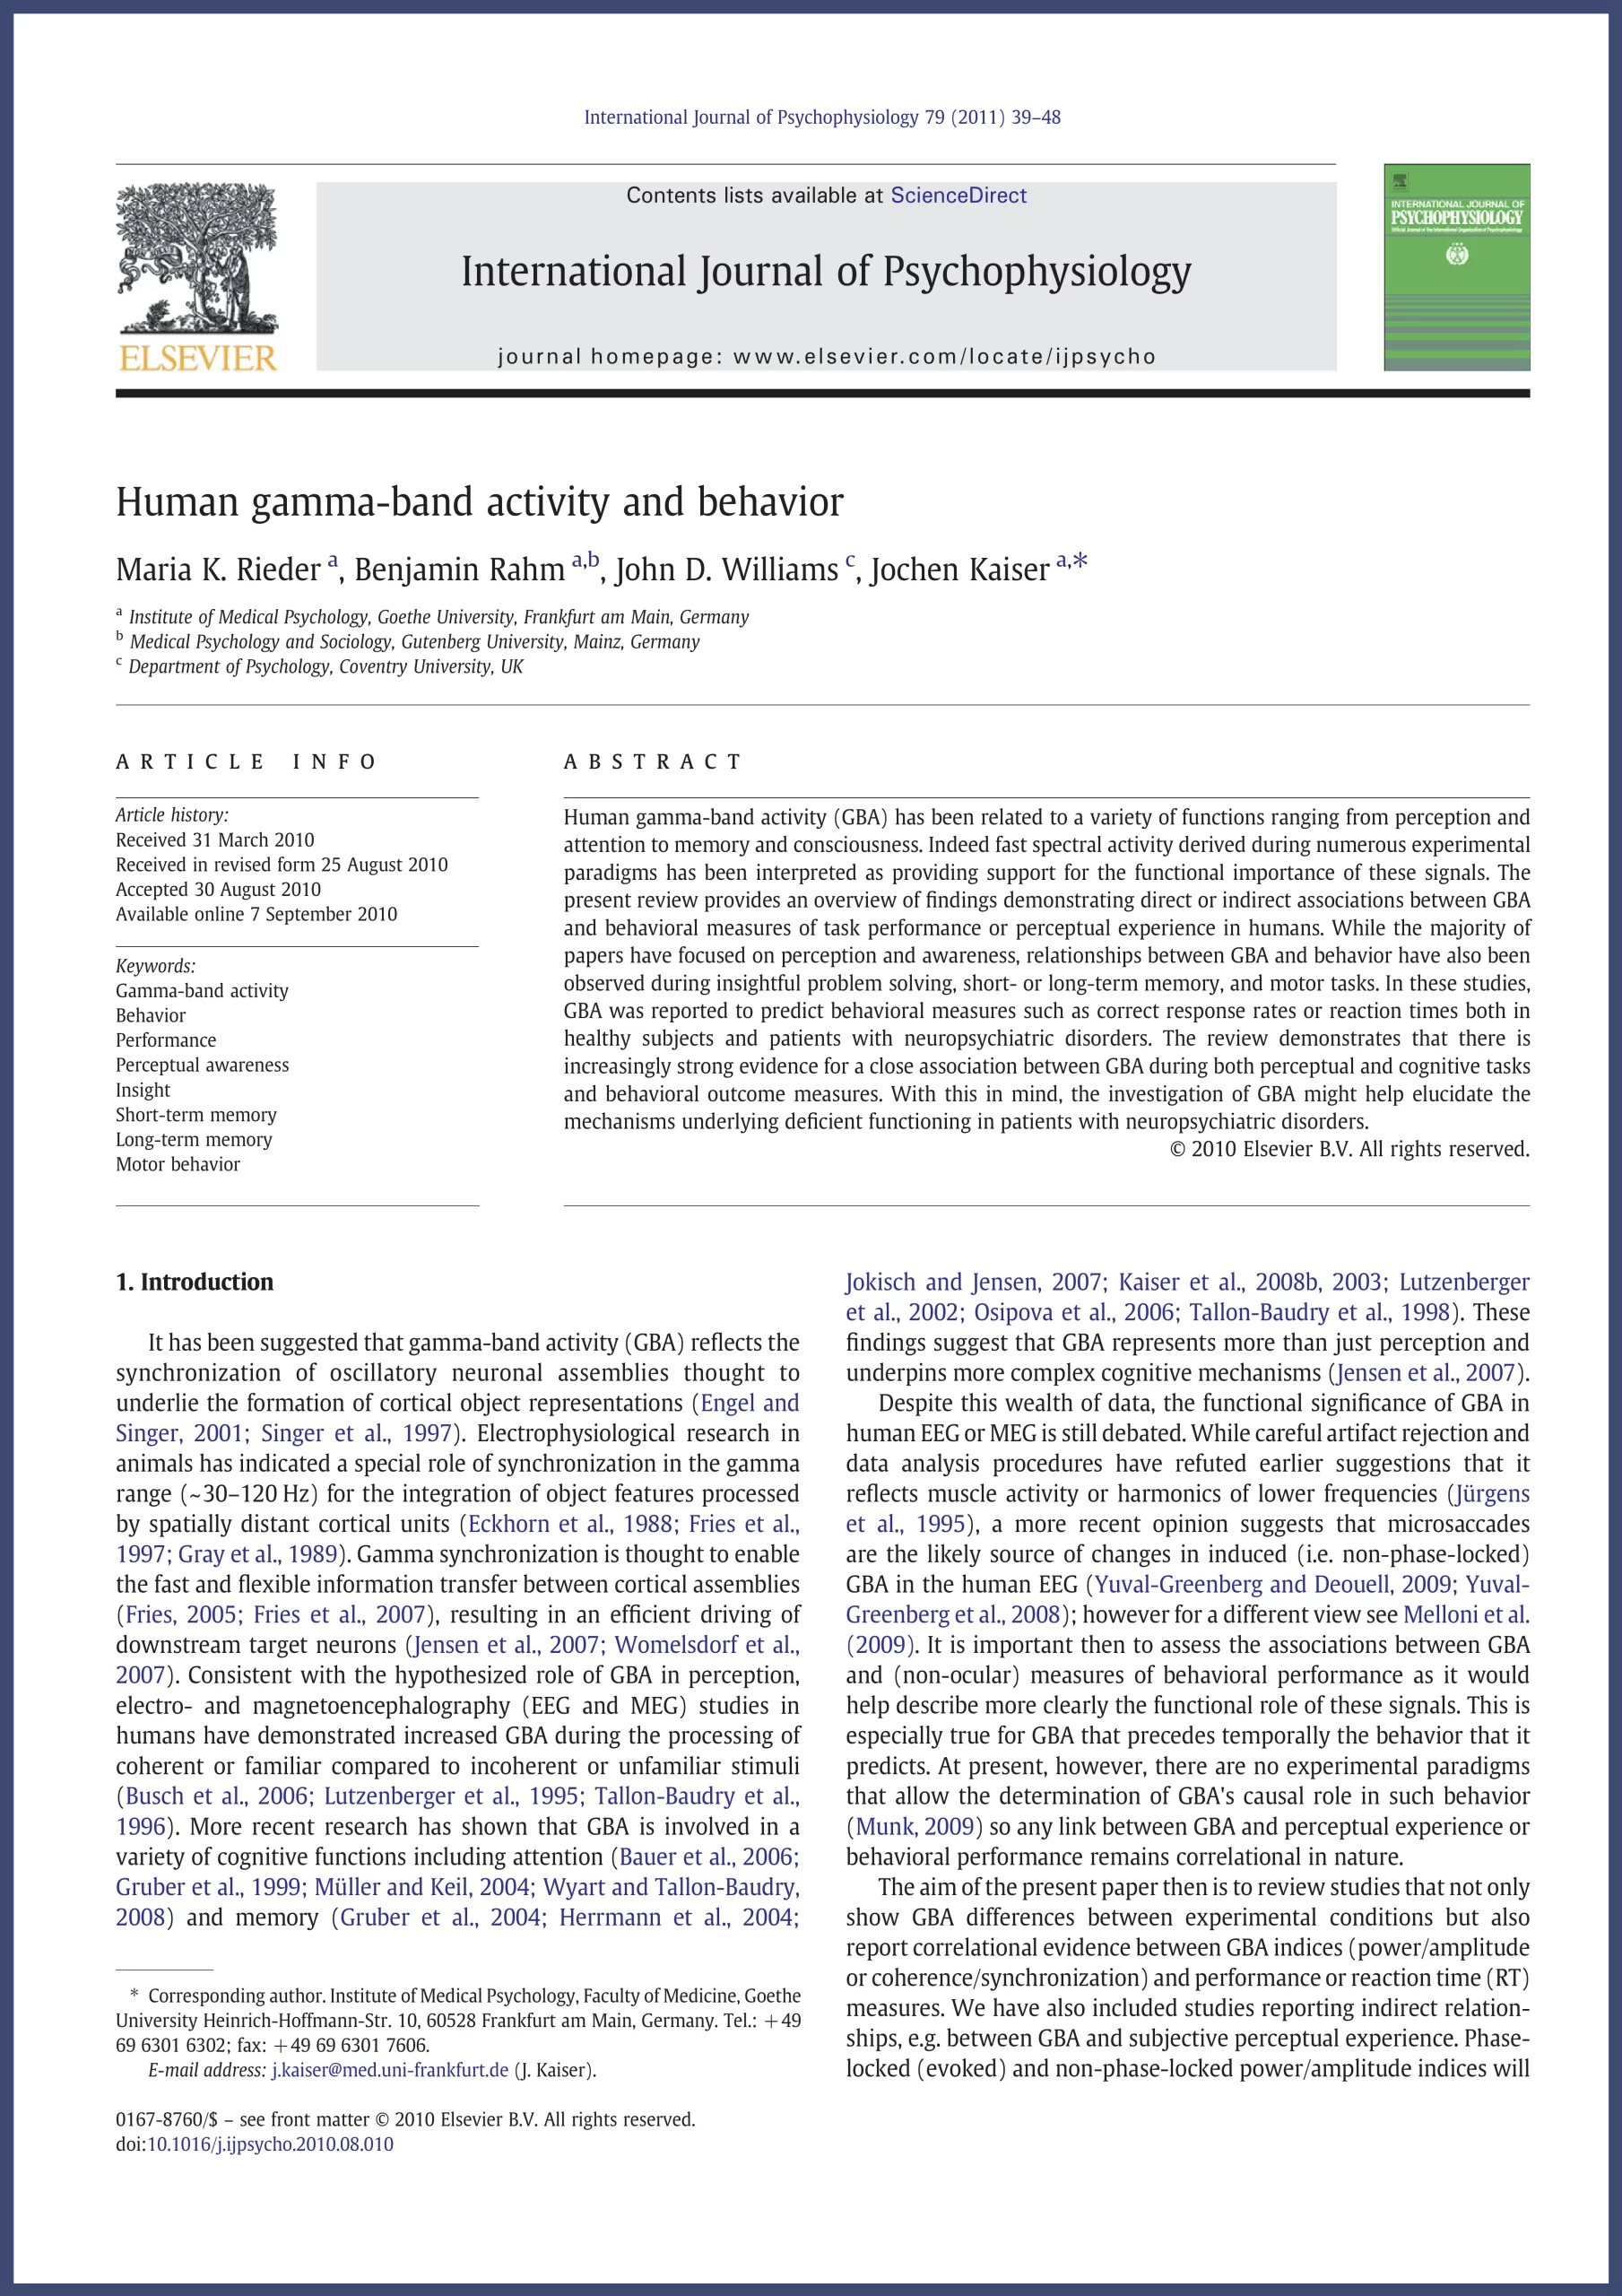 Human gamma-band activity and behavior publication by Reider, 2010